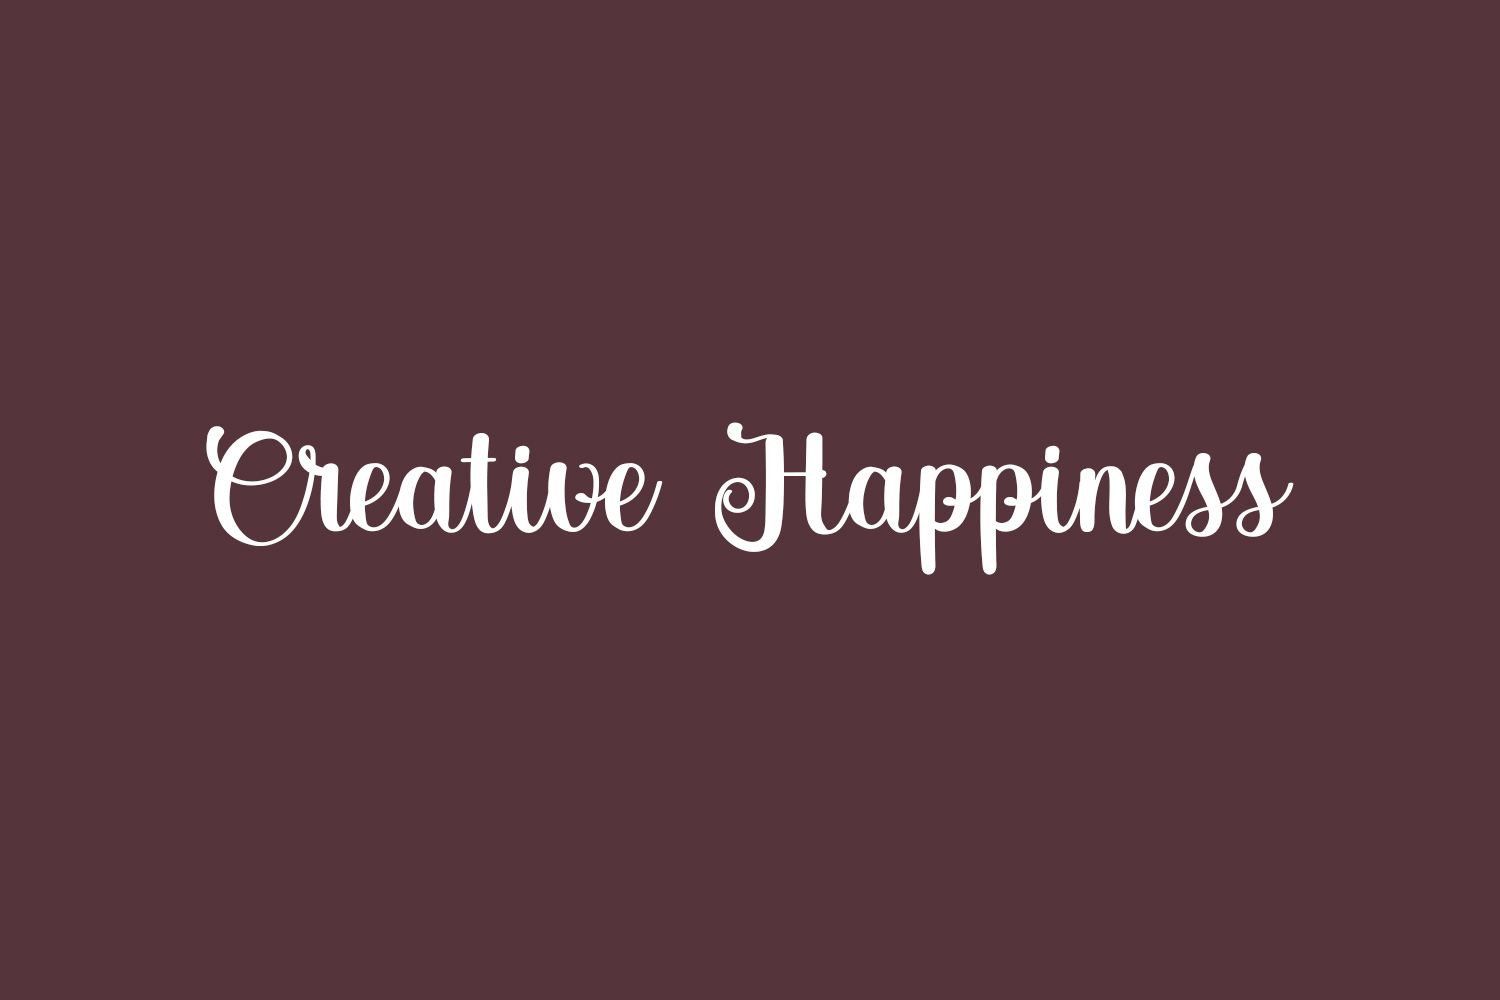 Creative Happiness Free Font